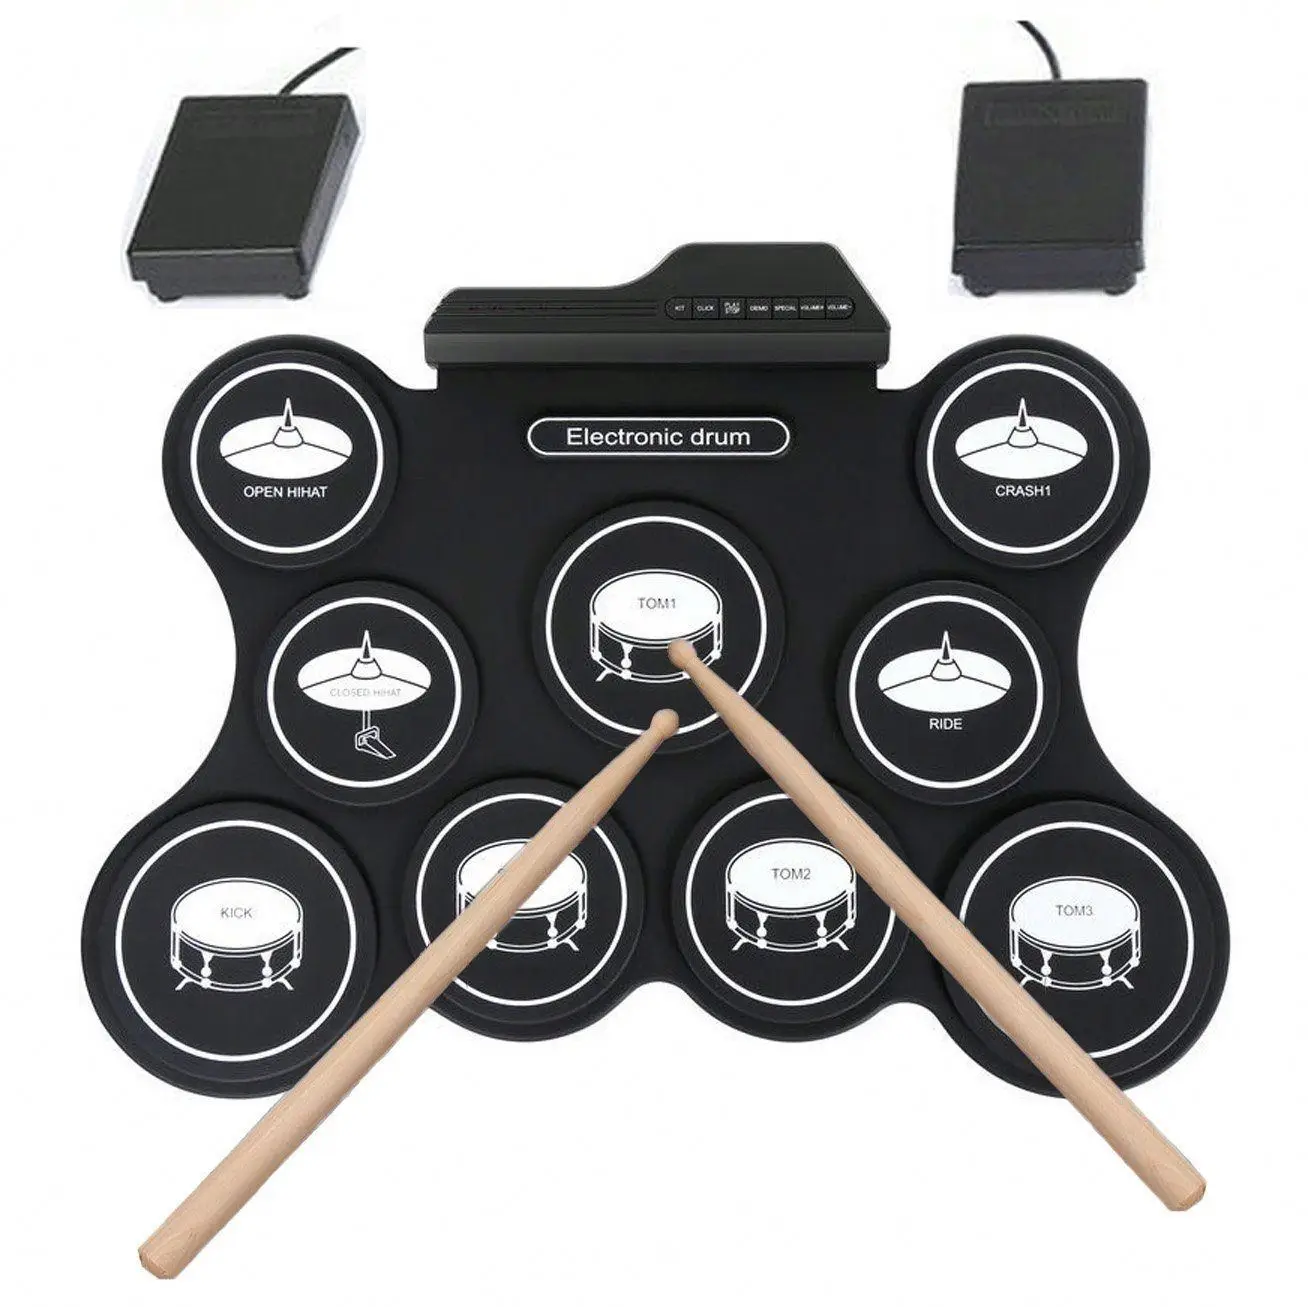 Digital Electronic Drum Compact Size USB Foldable Silicon Drums Set Digital Drum Kits / 9 Pads with Drumsticks Foot Pedals